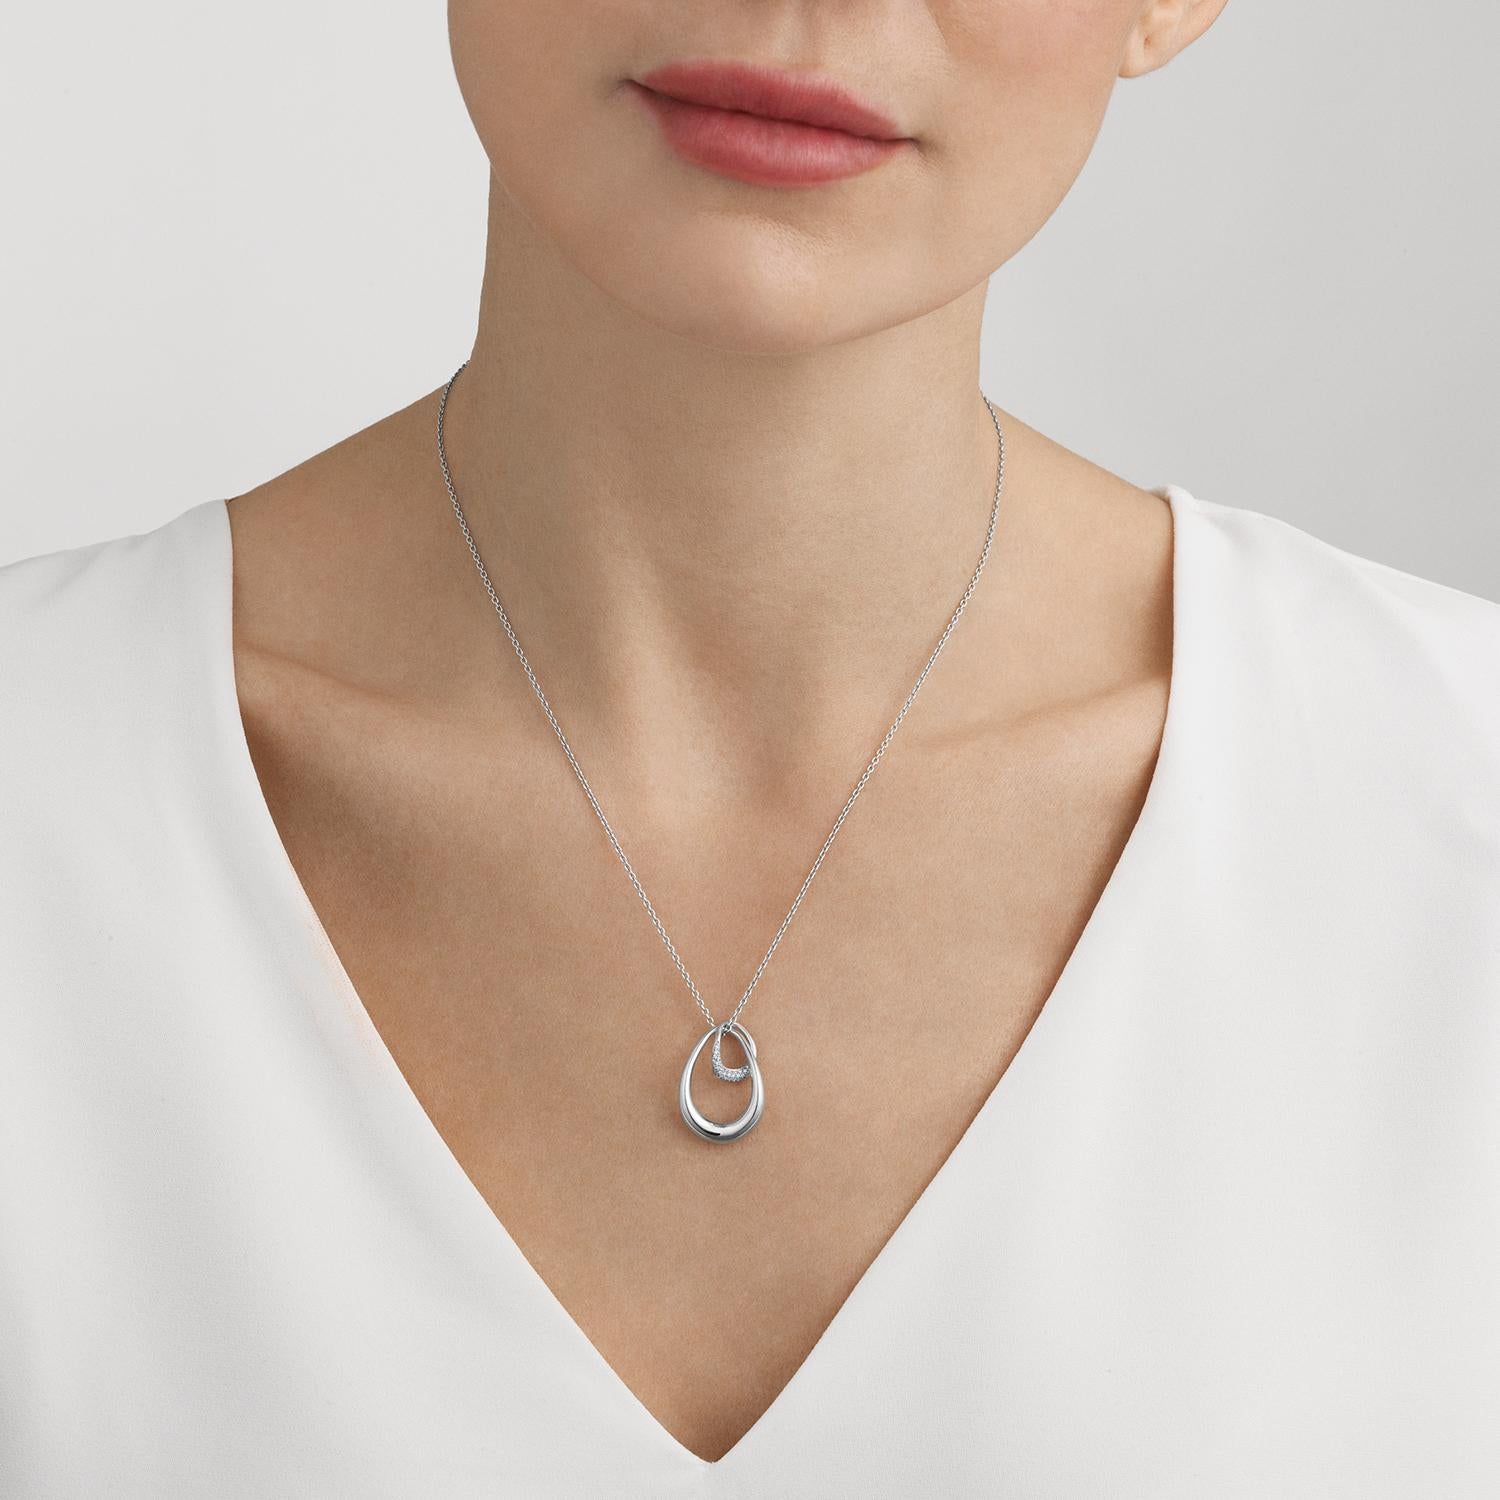 Two sterling silver organic forms - one pavé set with diamonds - are linked together forever, symbolising perhaps the bond between mother and child, two lovers or even close friends. This beautifully designed pendant has an emotional impact that